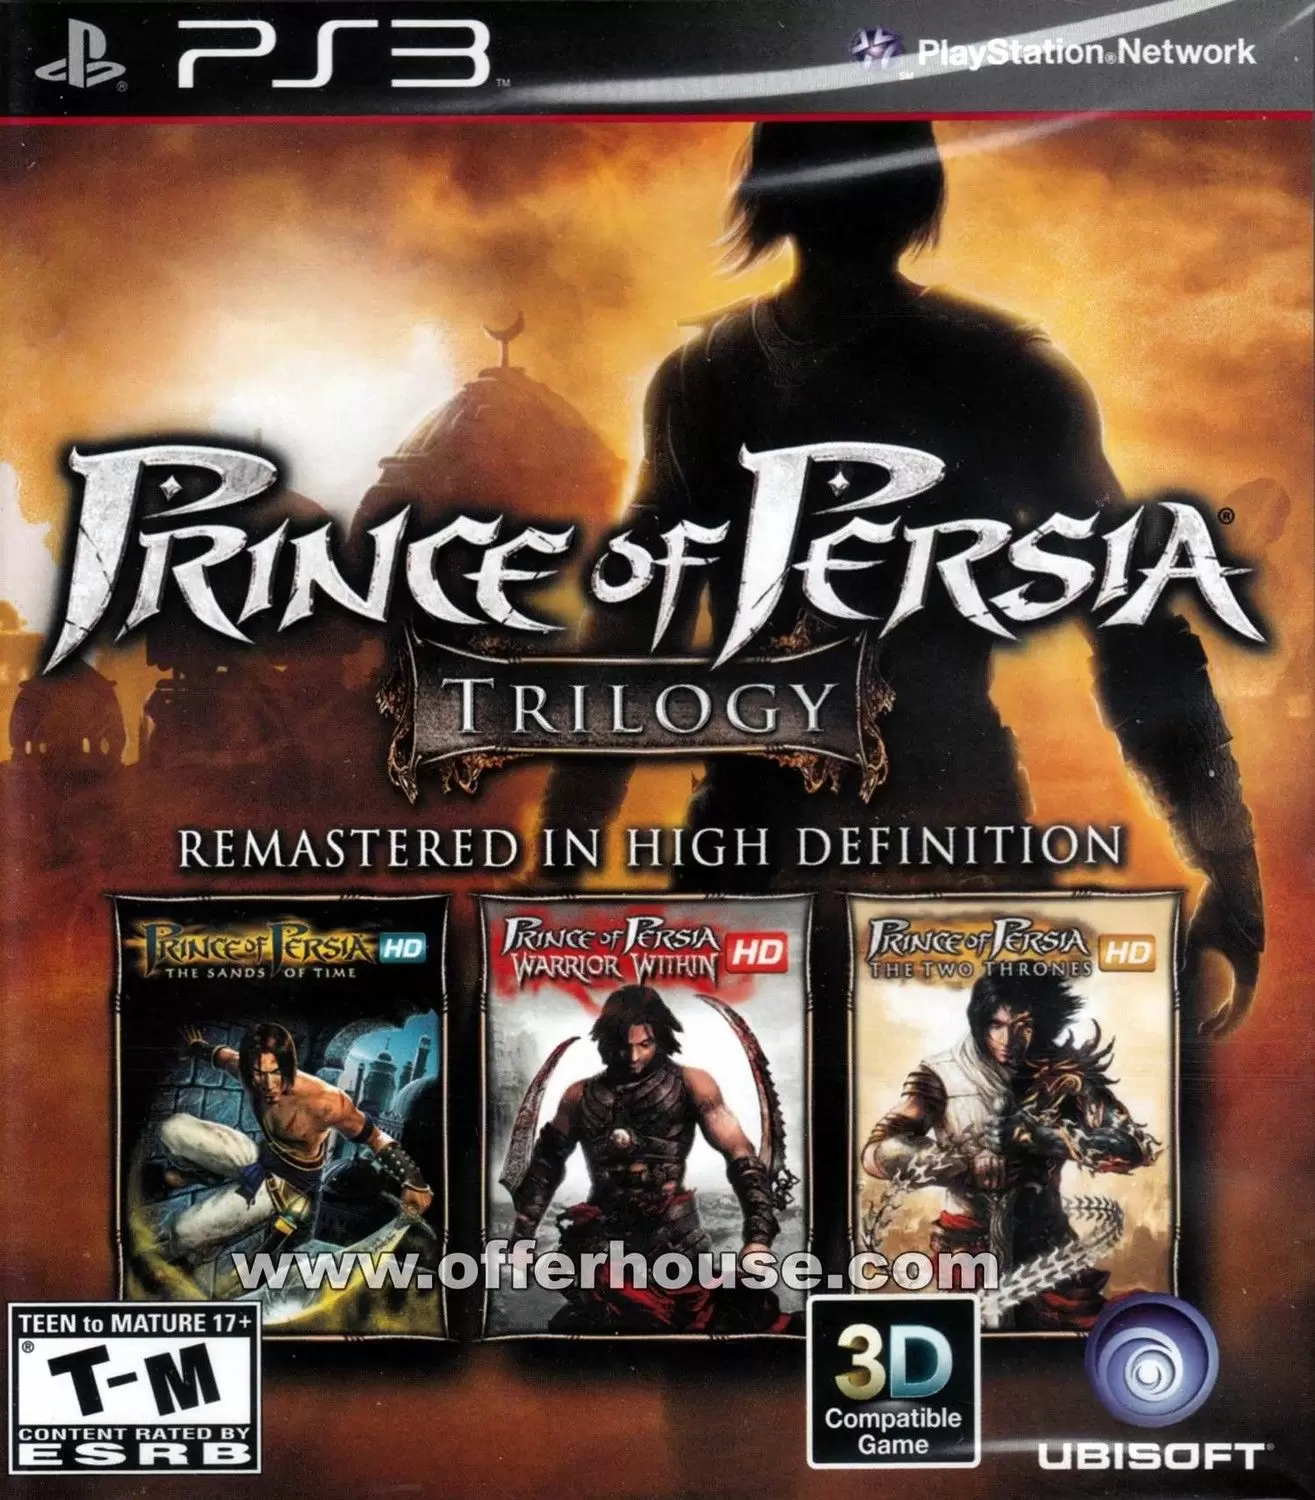 Jeux PS3 - Prince of Persia Trilogy HD